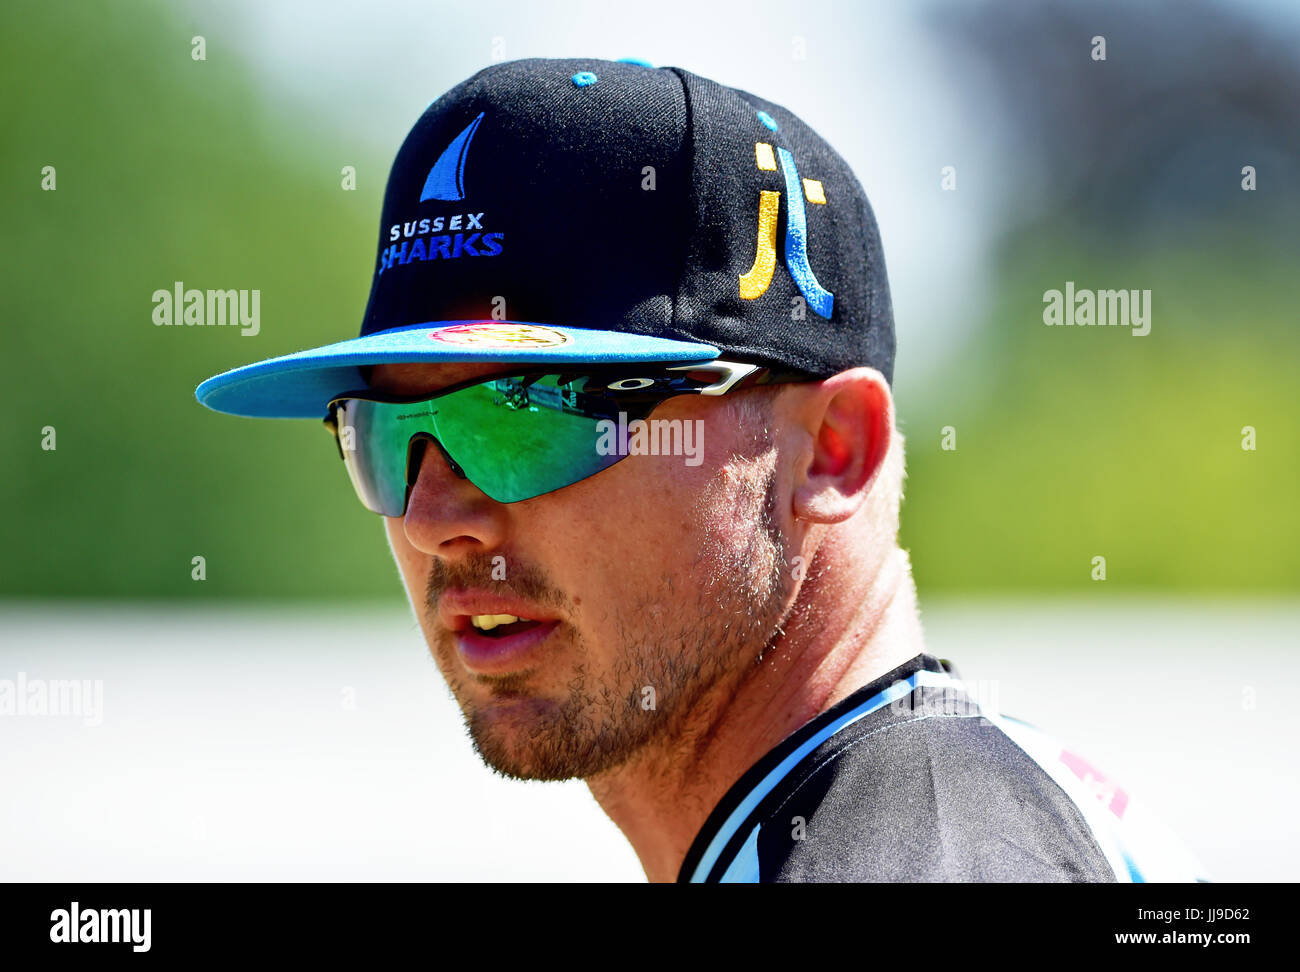 Stiaan van Zyl of Sussex Sharks v Glamorgan in the NatWest T20 blast match at the Arundel Castle ground in West Sussex UK Sunday 9th July 2017 Stock Photo